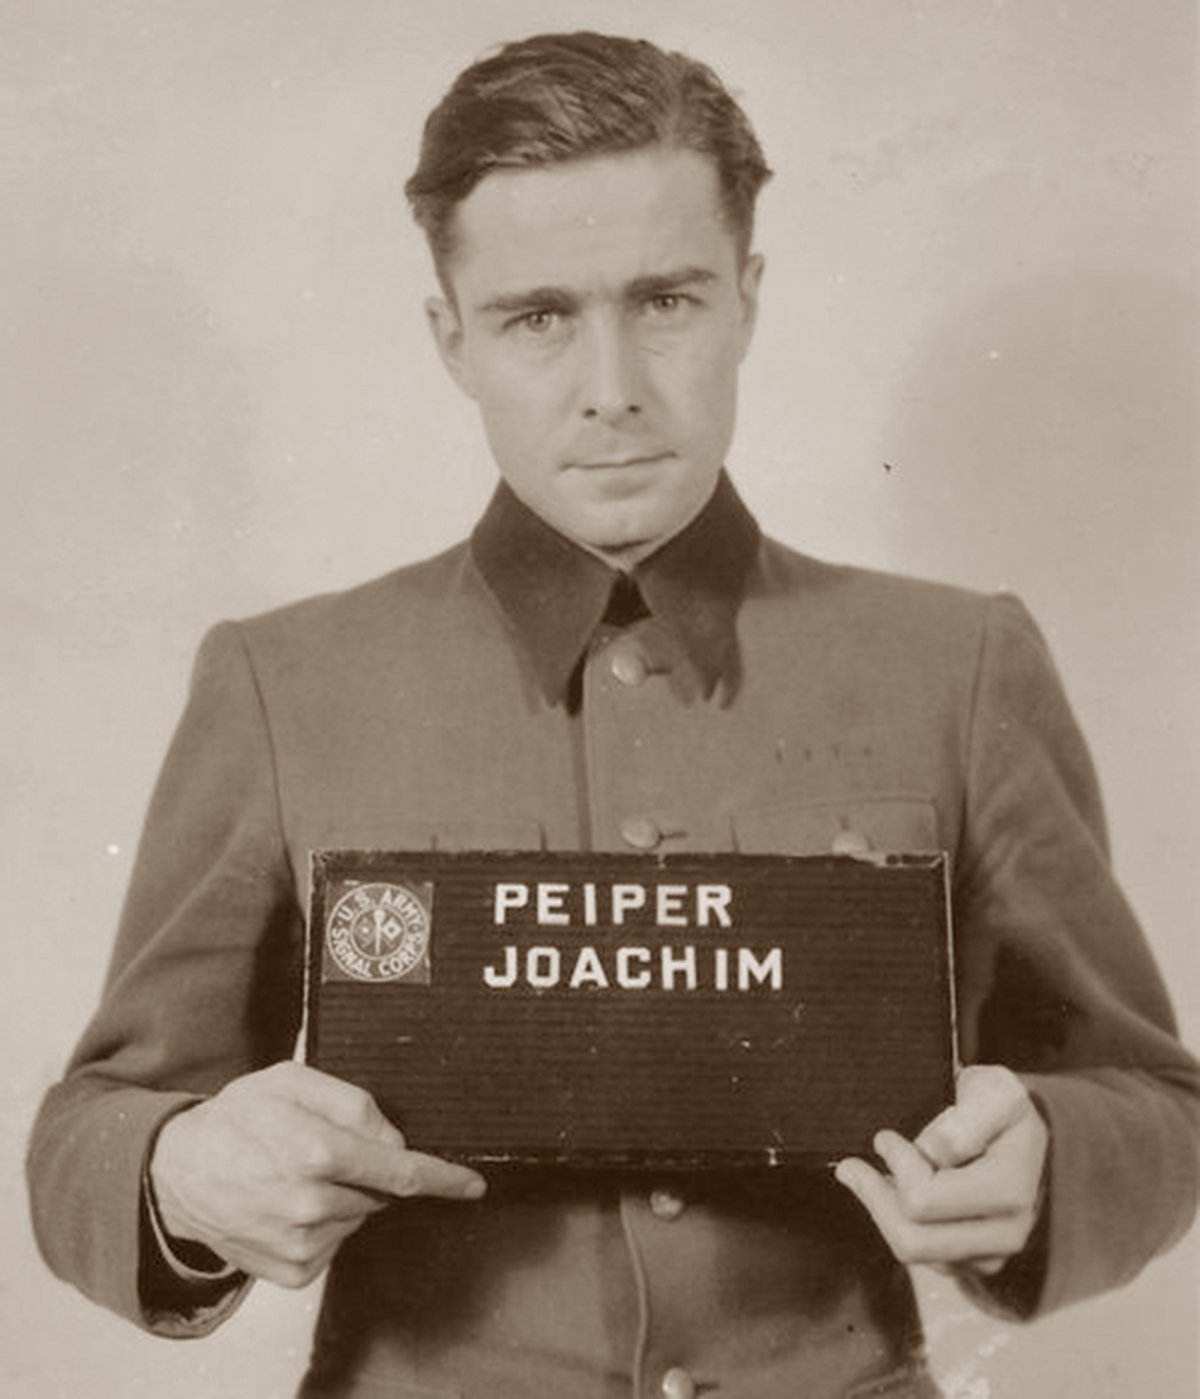 A historical mugshot of Joachim Peiper, taken after his arrest in 1944. He is seen in uniform, holding a nameplate with his name on it, displaying a somber expression.